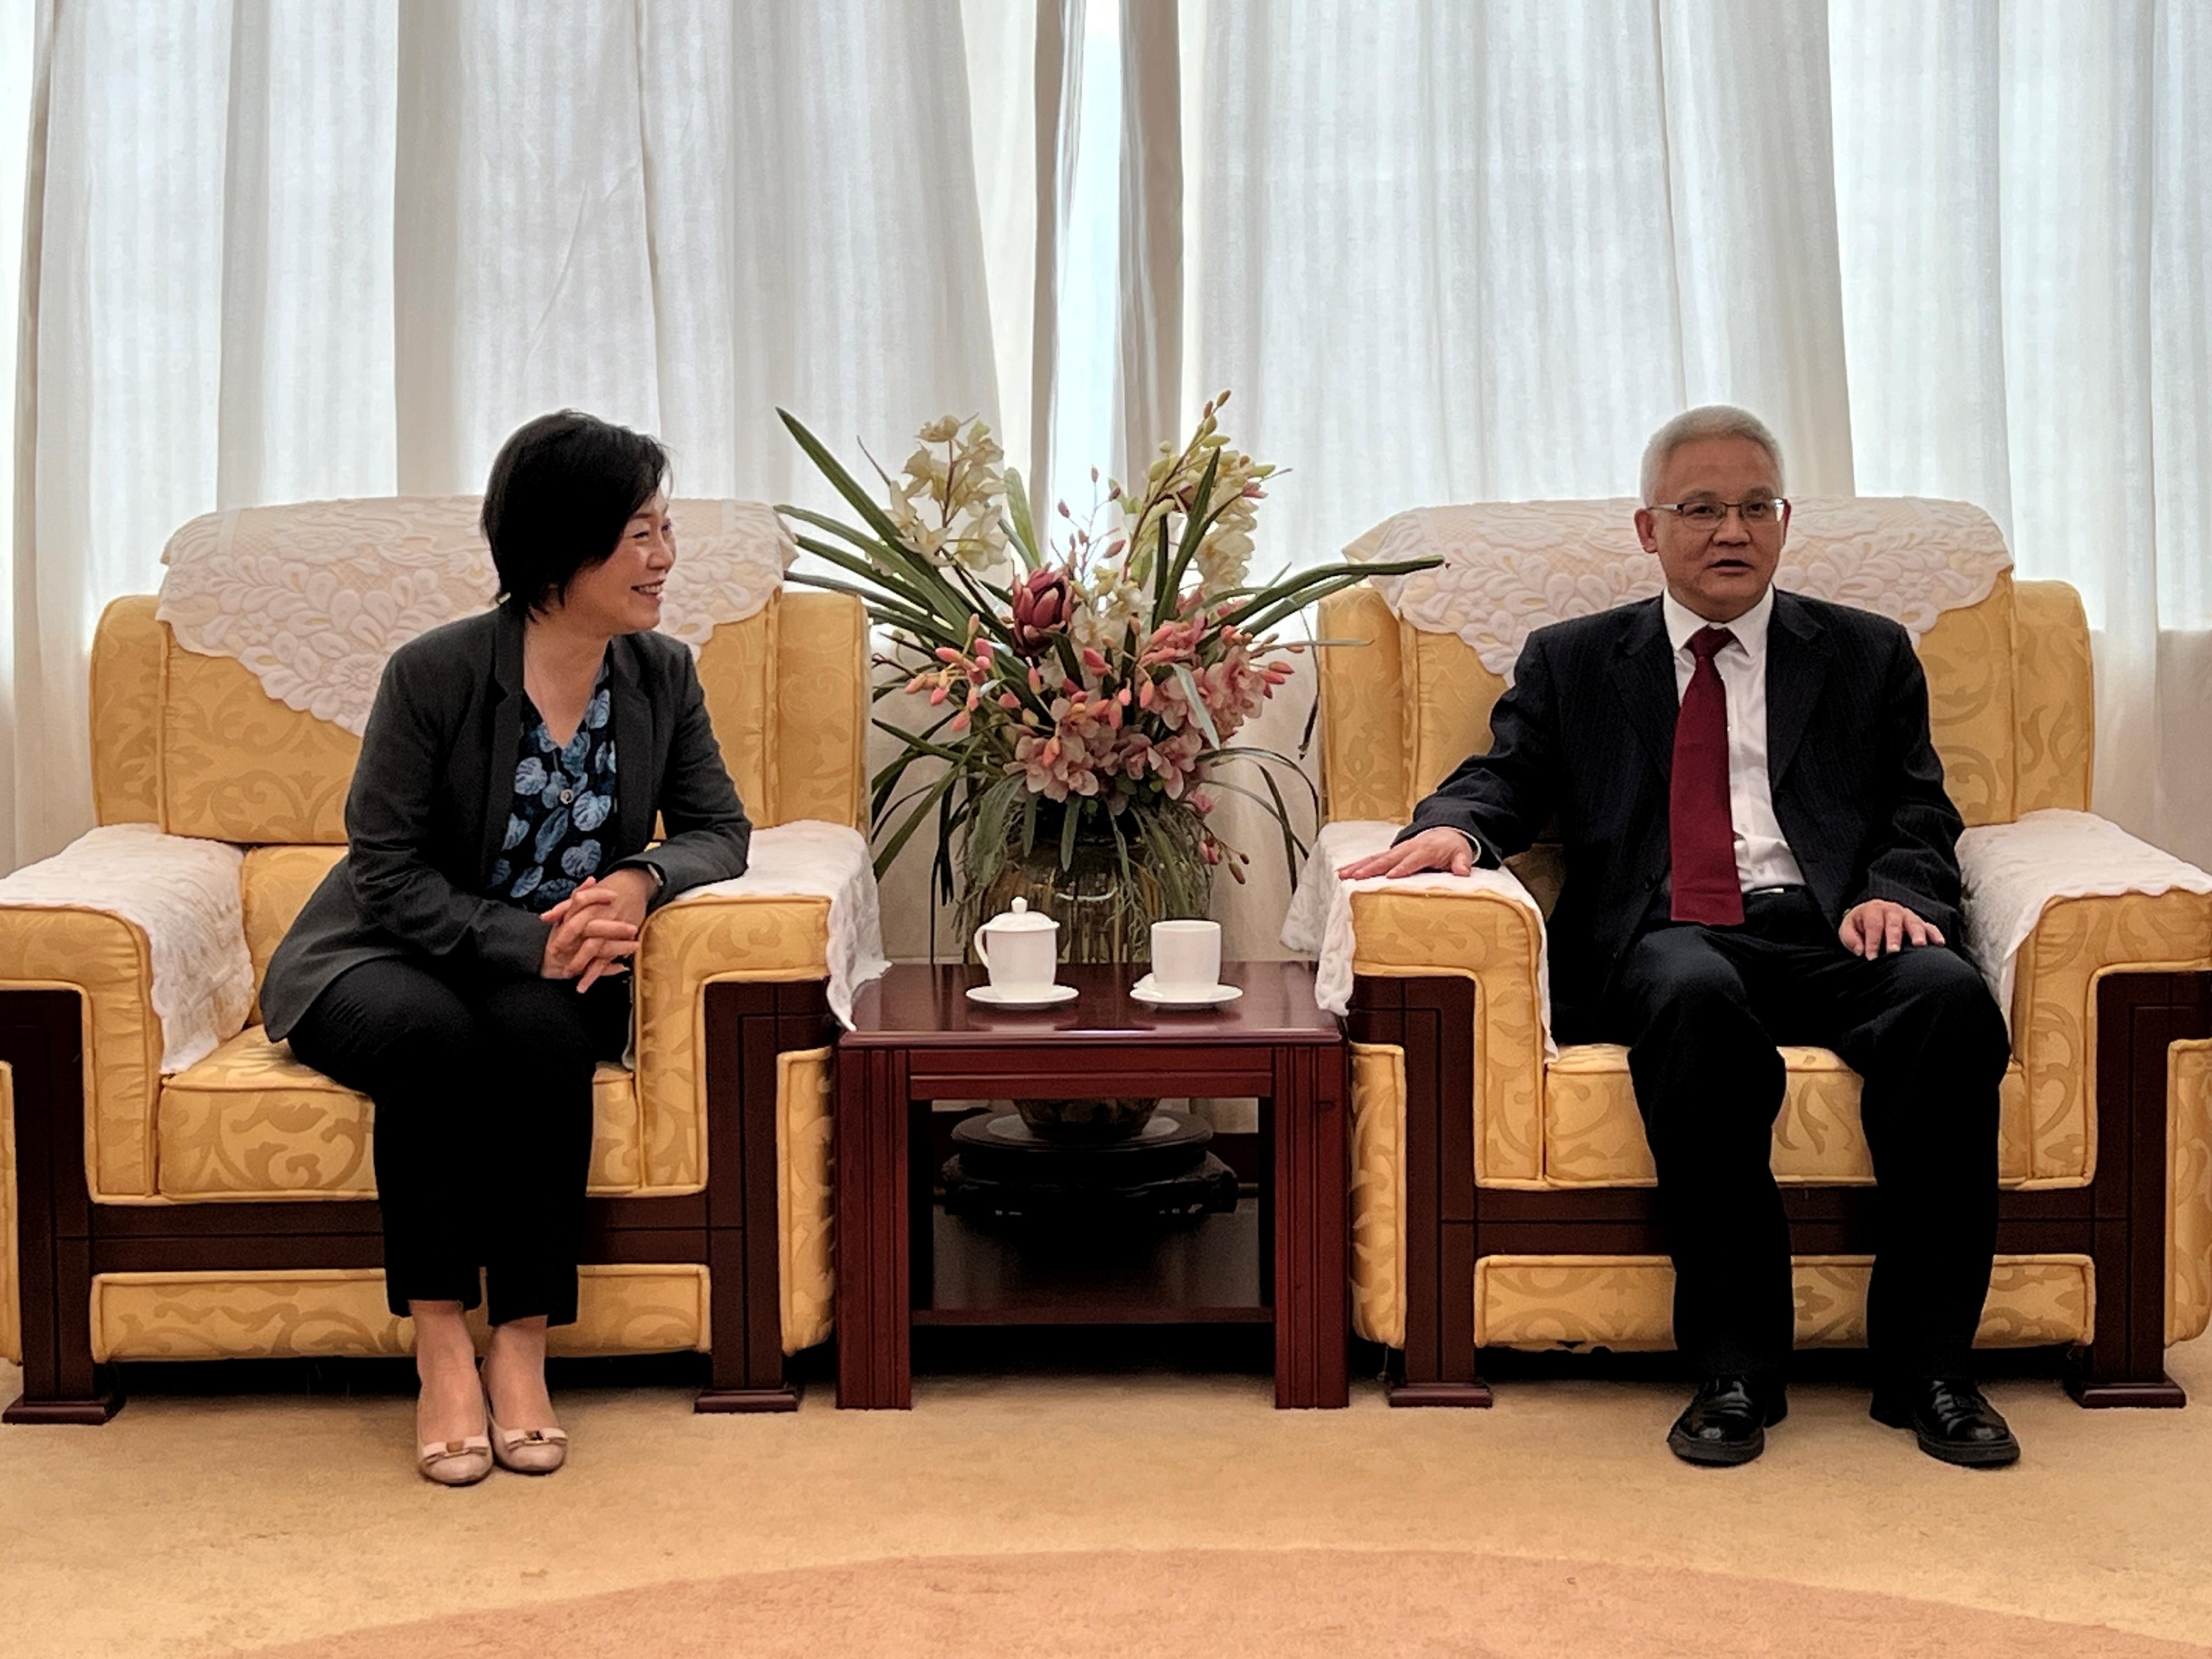 The Secretary for Education, Dr Choi Yuk-lin (left), visits Beijing Normal University and meets its President, Professor Ma Jun (right), in Beijing today (May 16).